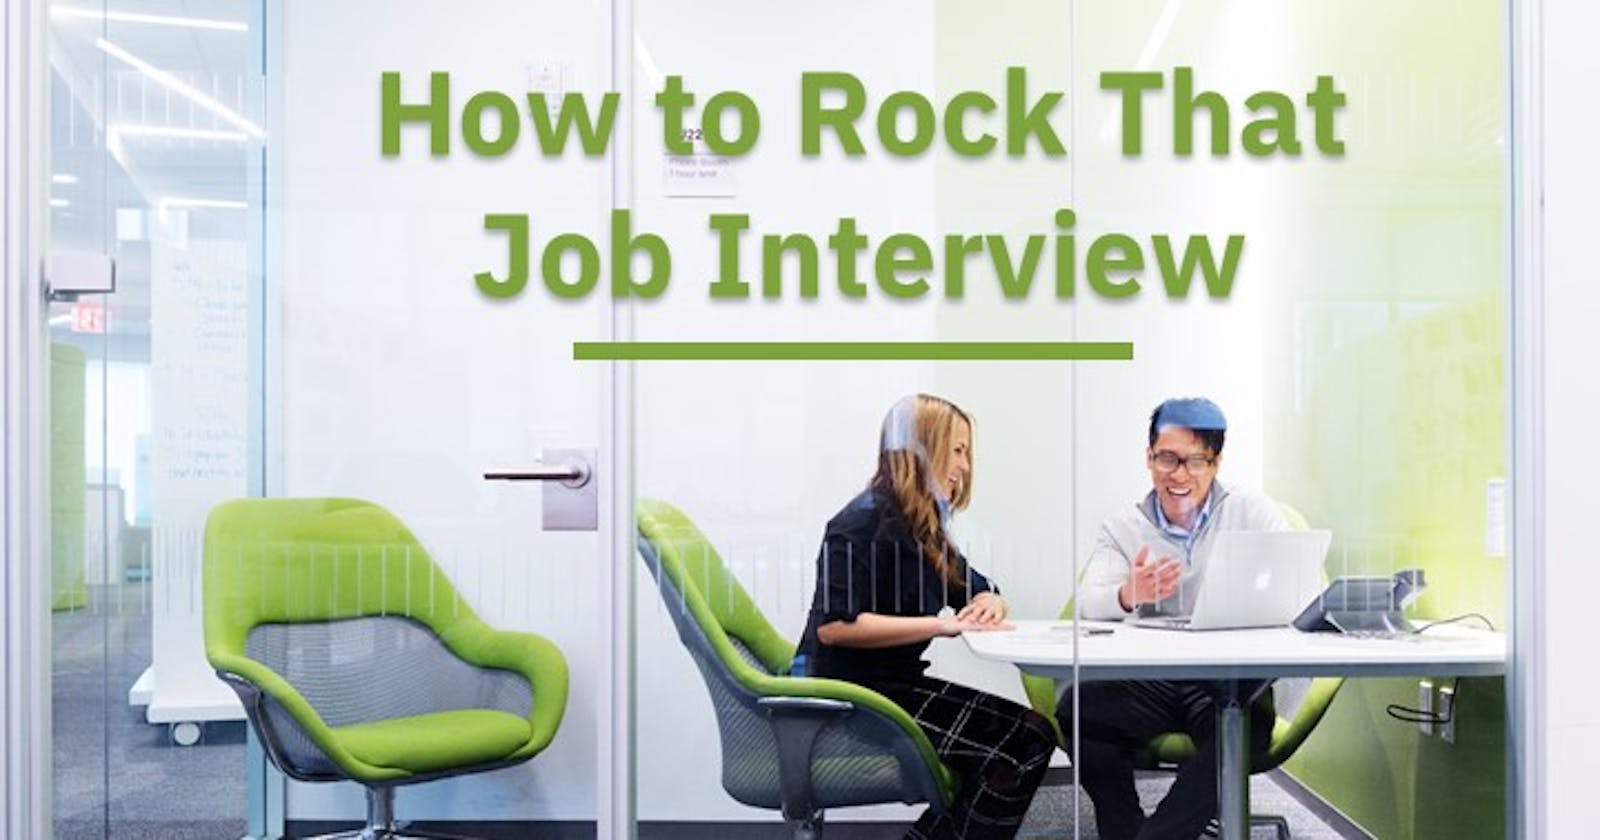 Tips to Rock That Job Interview!